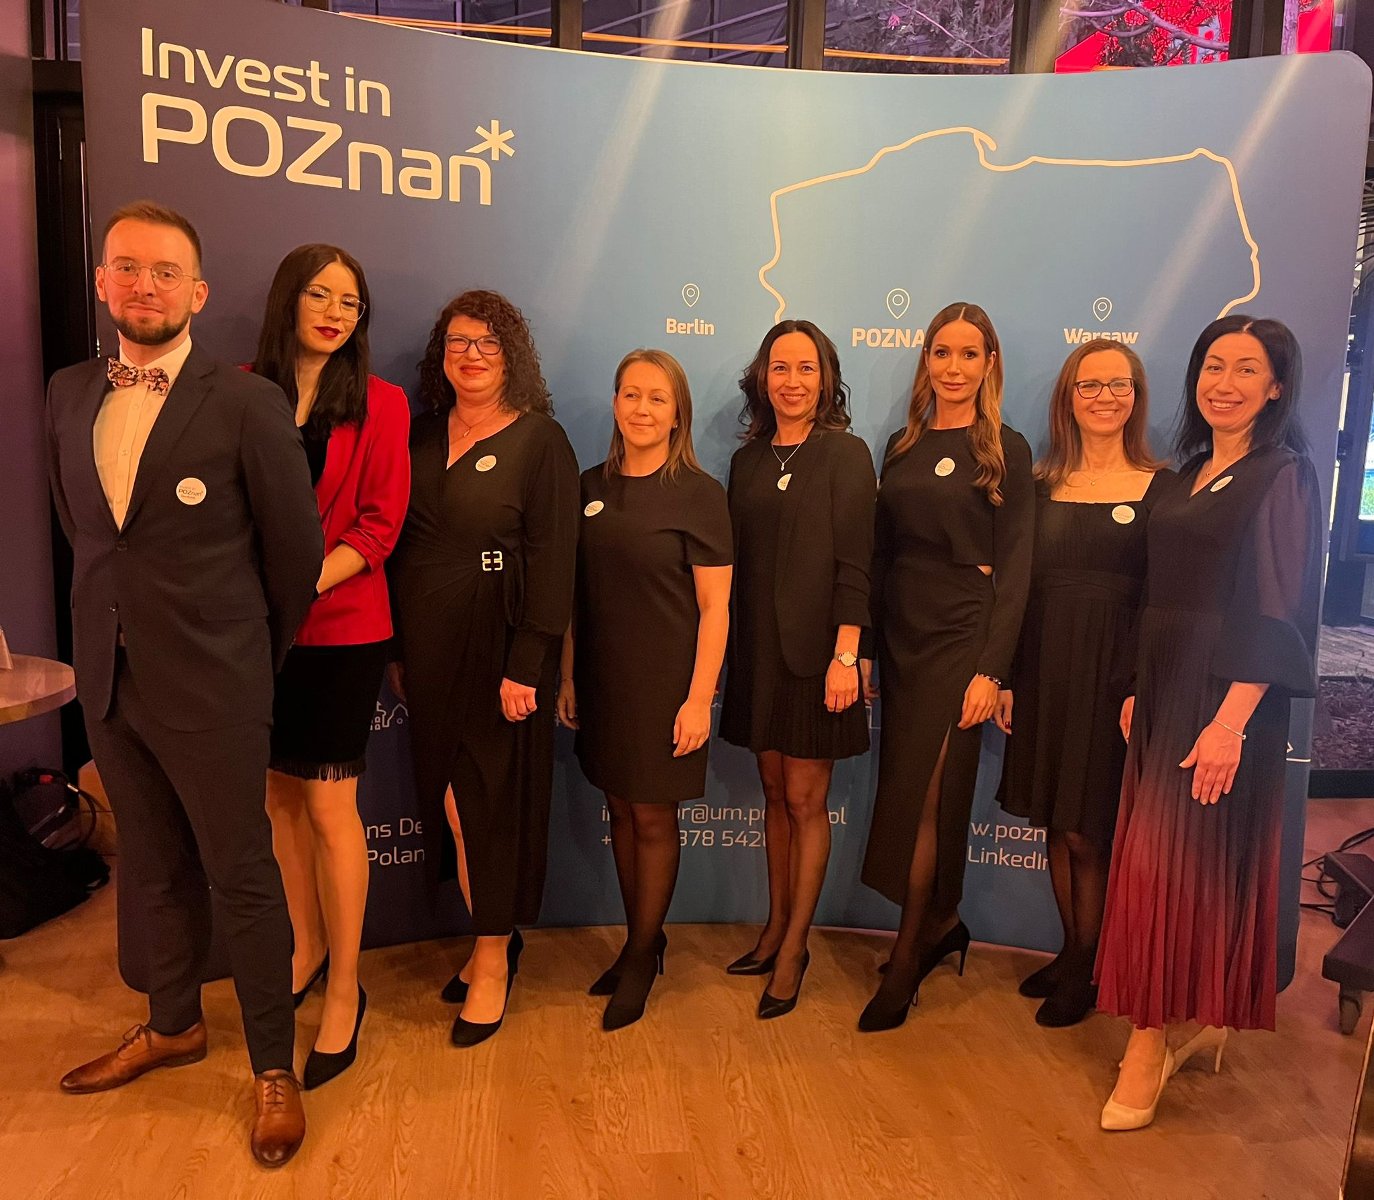 The photo shows Investor Relations Department team in evening clothes. In the background is a blue wall with the Invest in Poznań logo. - grafika artykułu